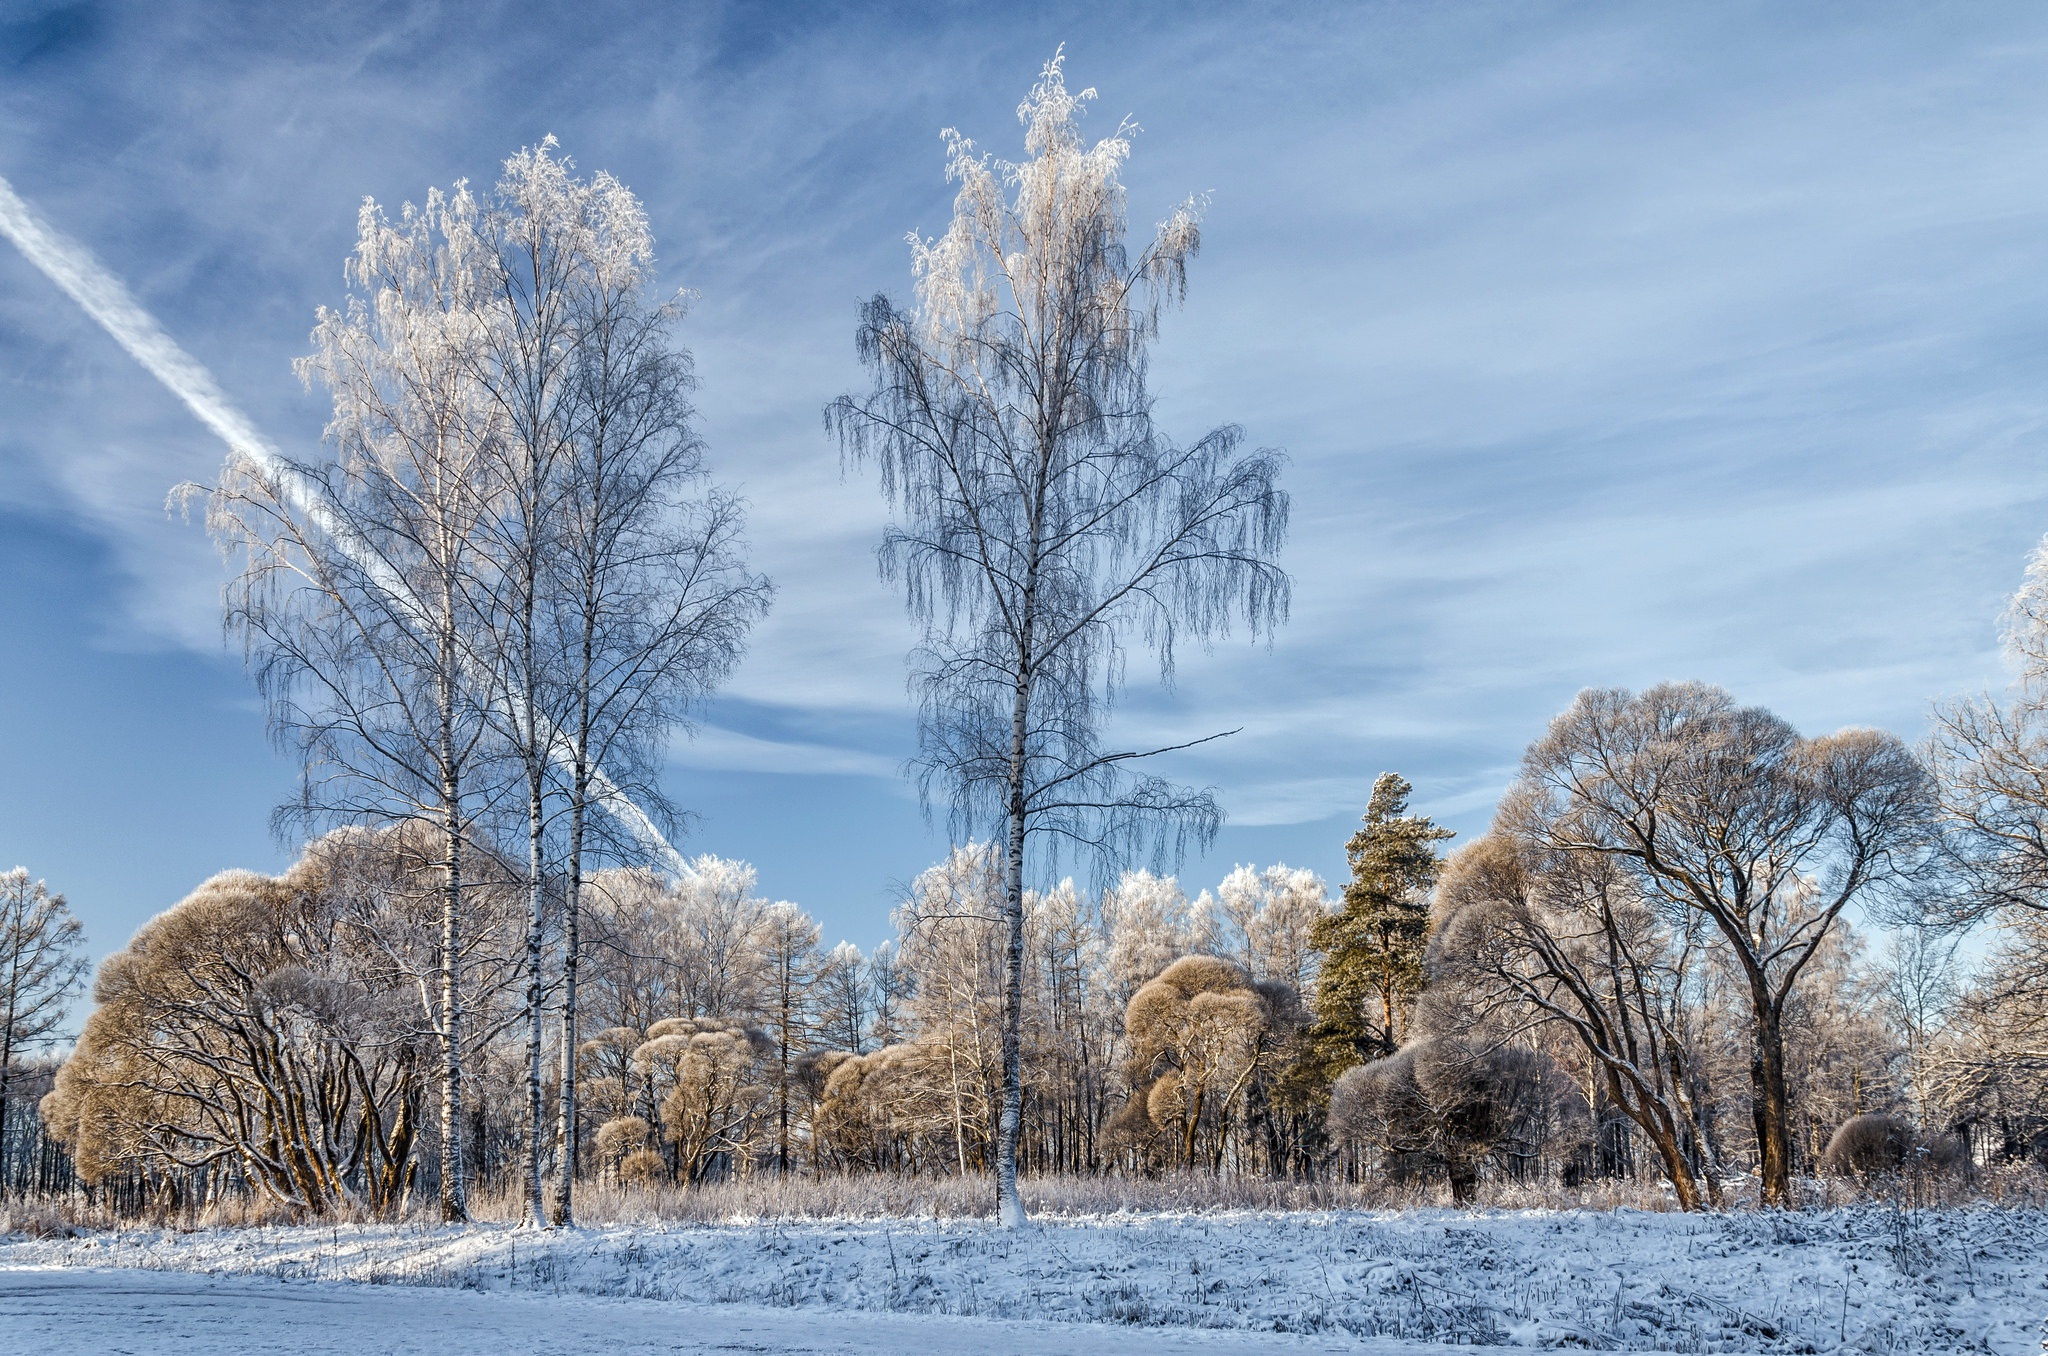 General 2048x1356 nature winter trees snow contrails